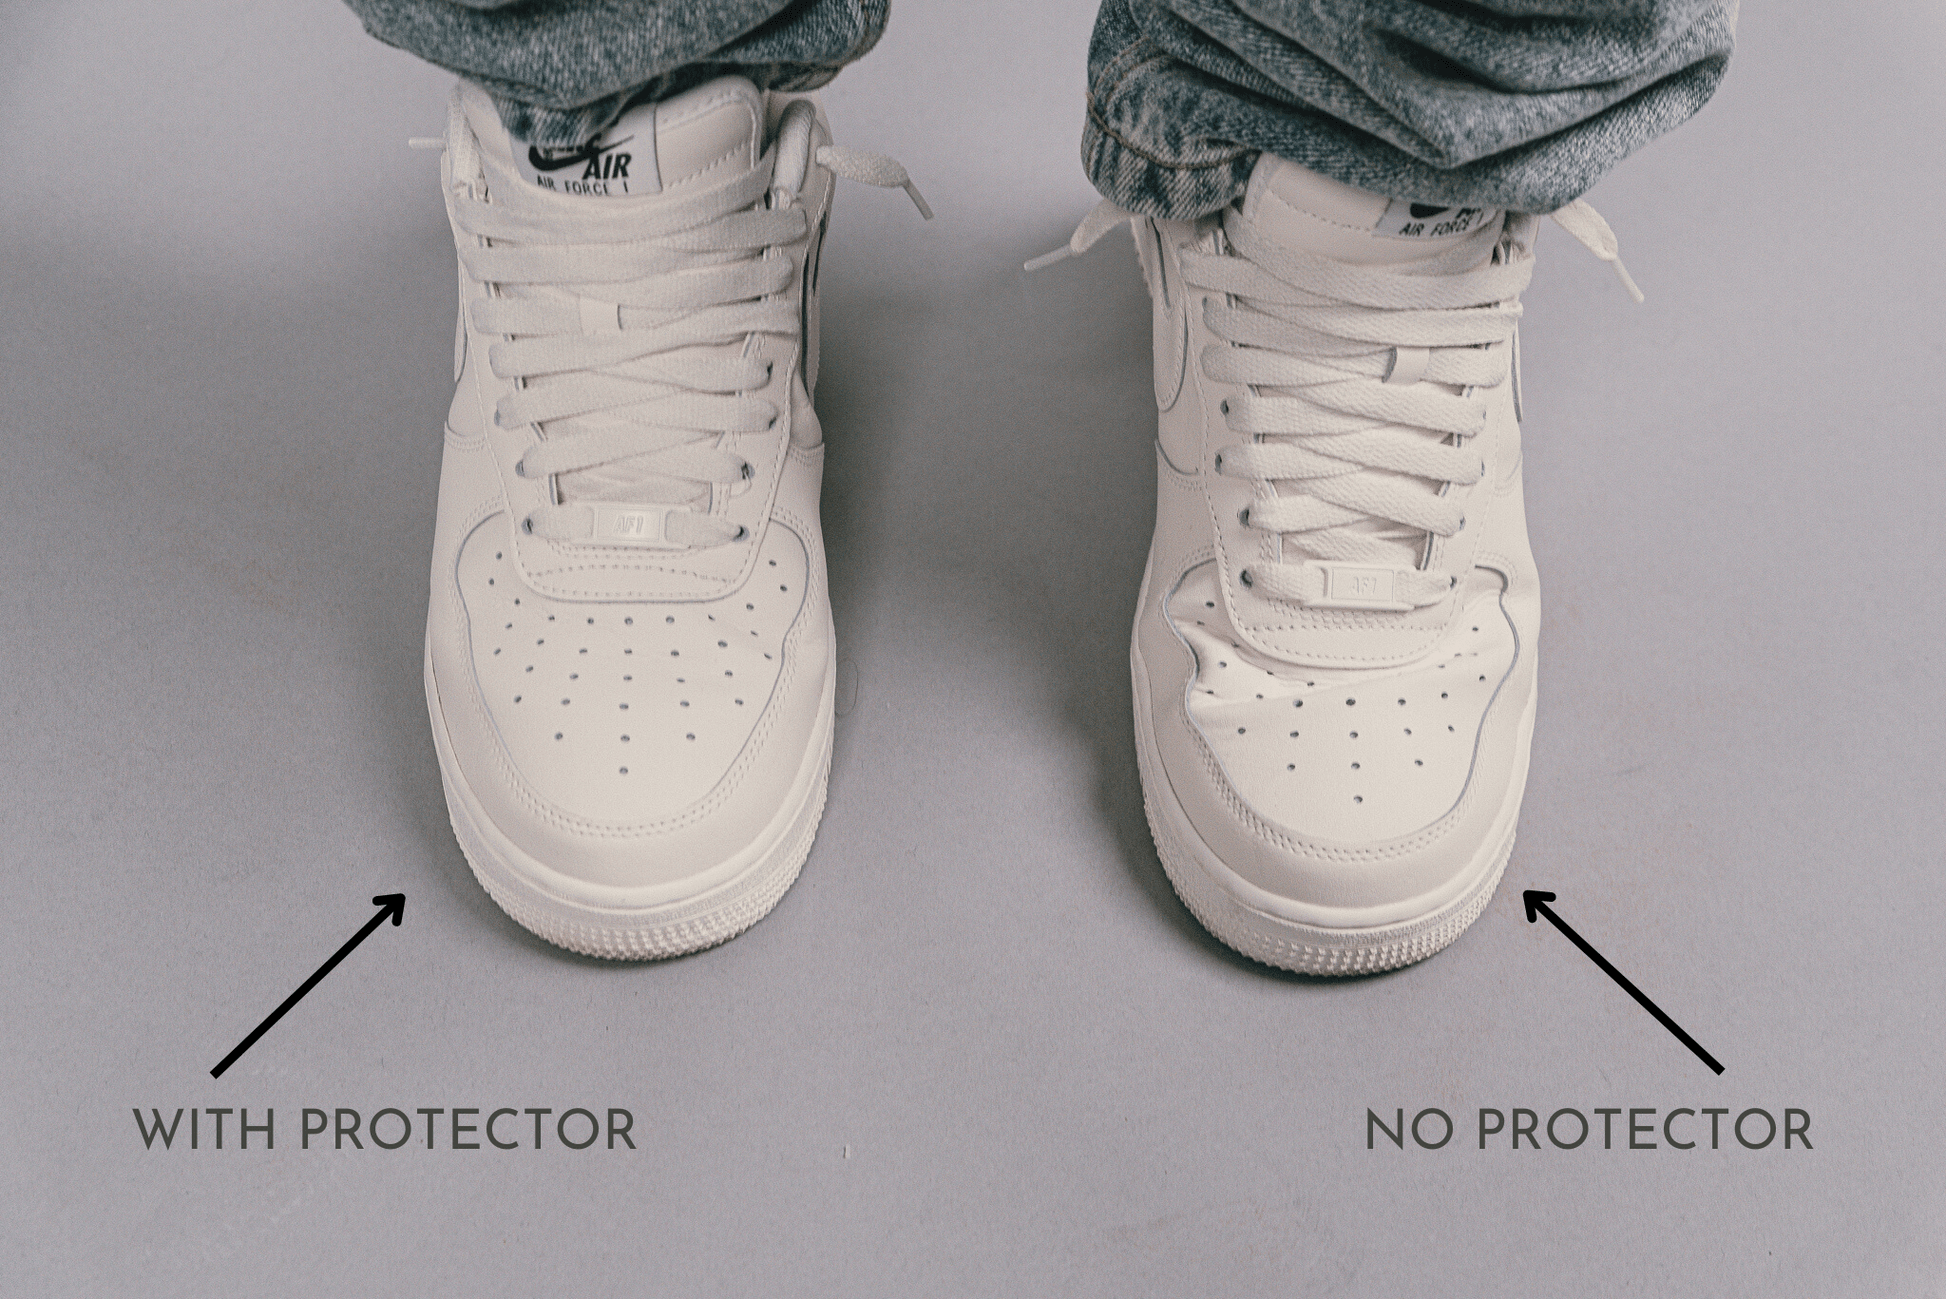 Sneaker crease protector crease guards  shown being use in Nike AF1 Air force 1 in a comparison